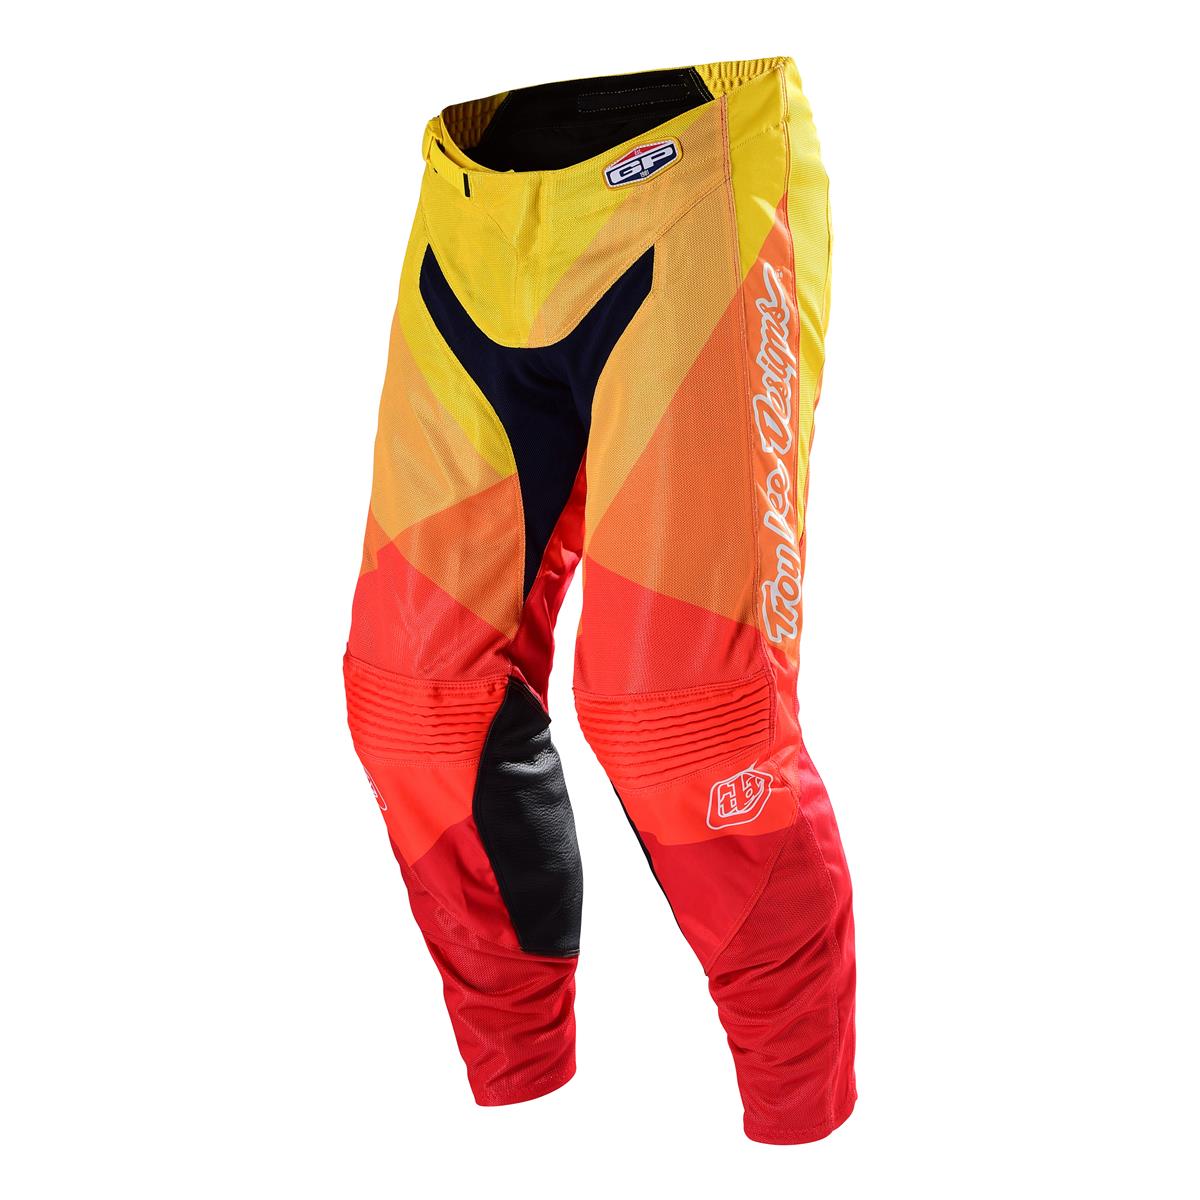 Troy Lee Designs GP Air Astro LE MX Motocross Pants Navy Yellow Red Size 32 